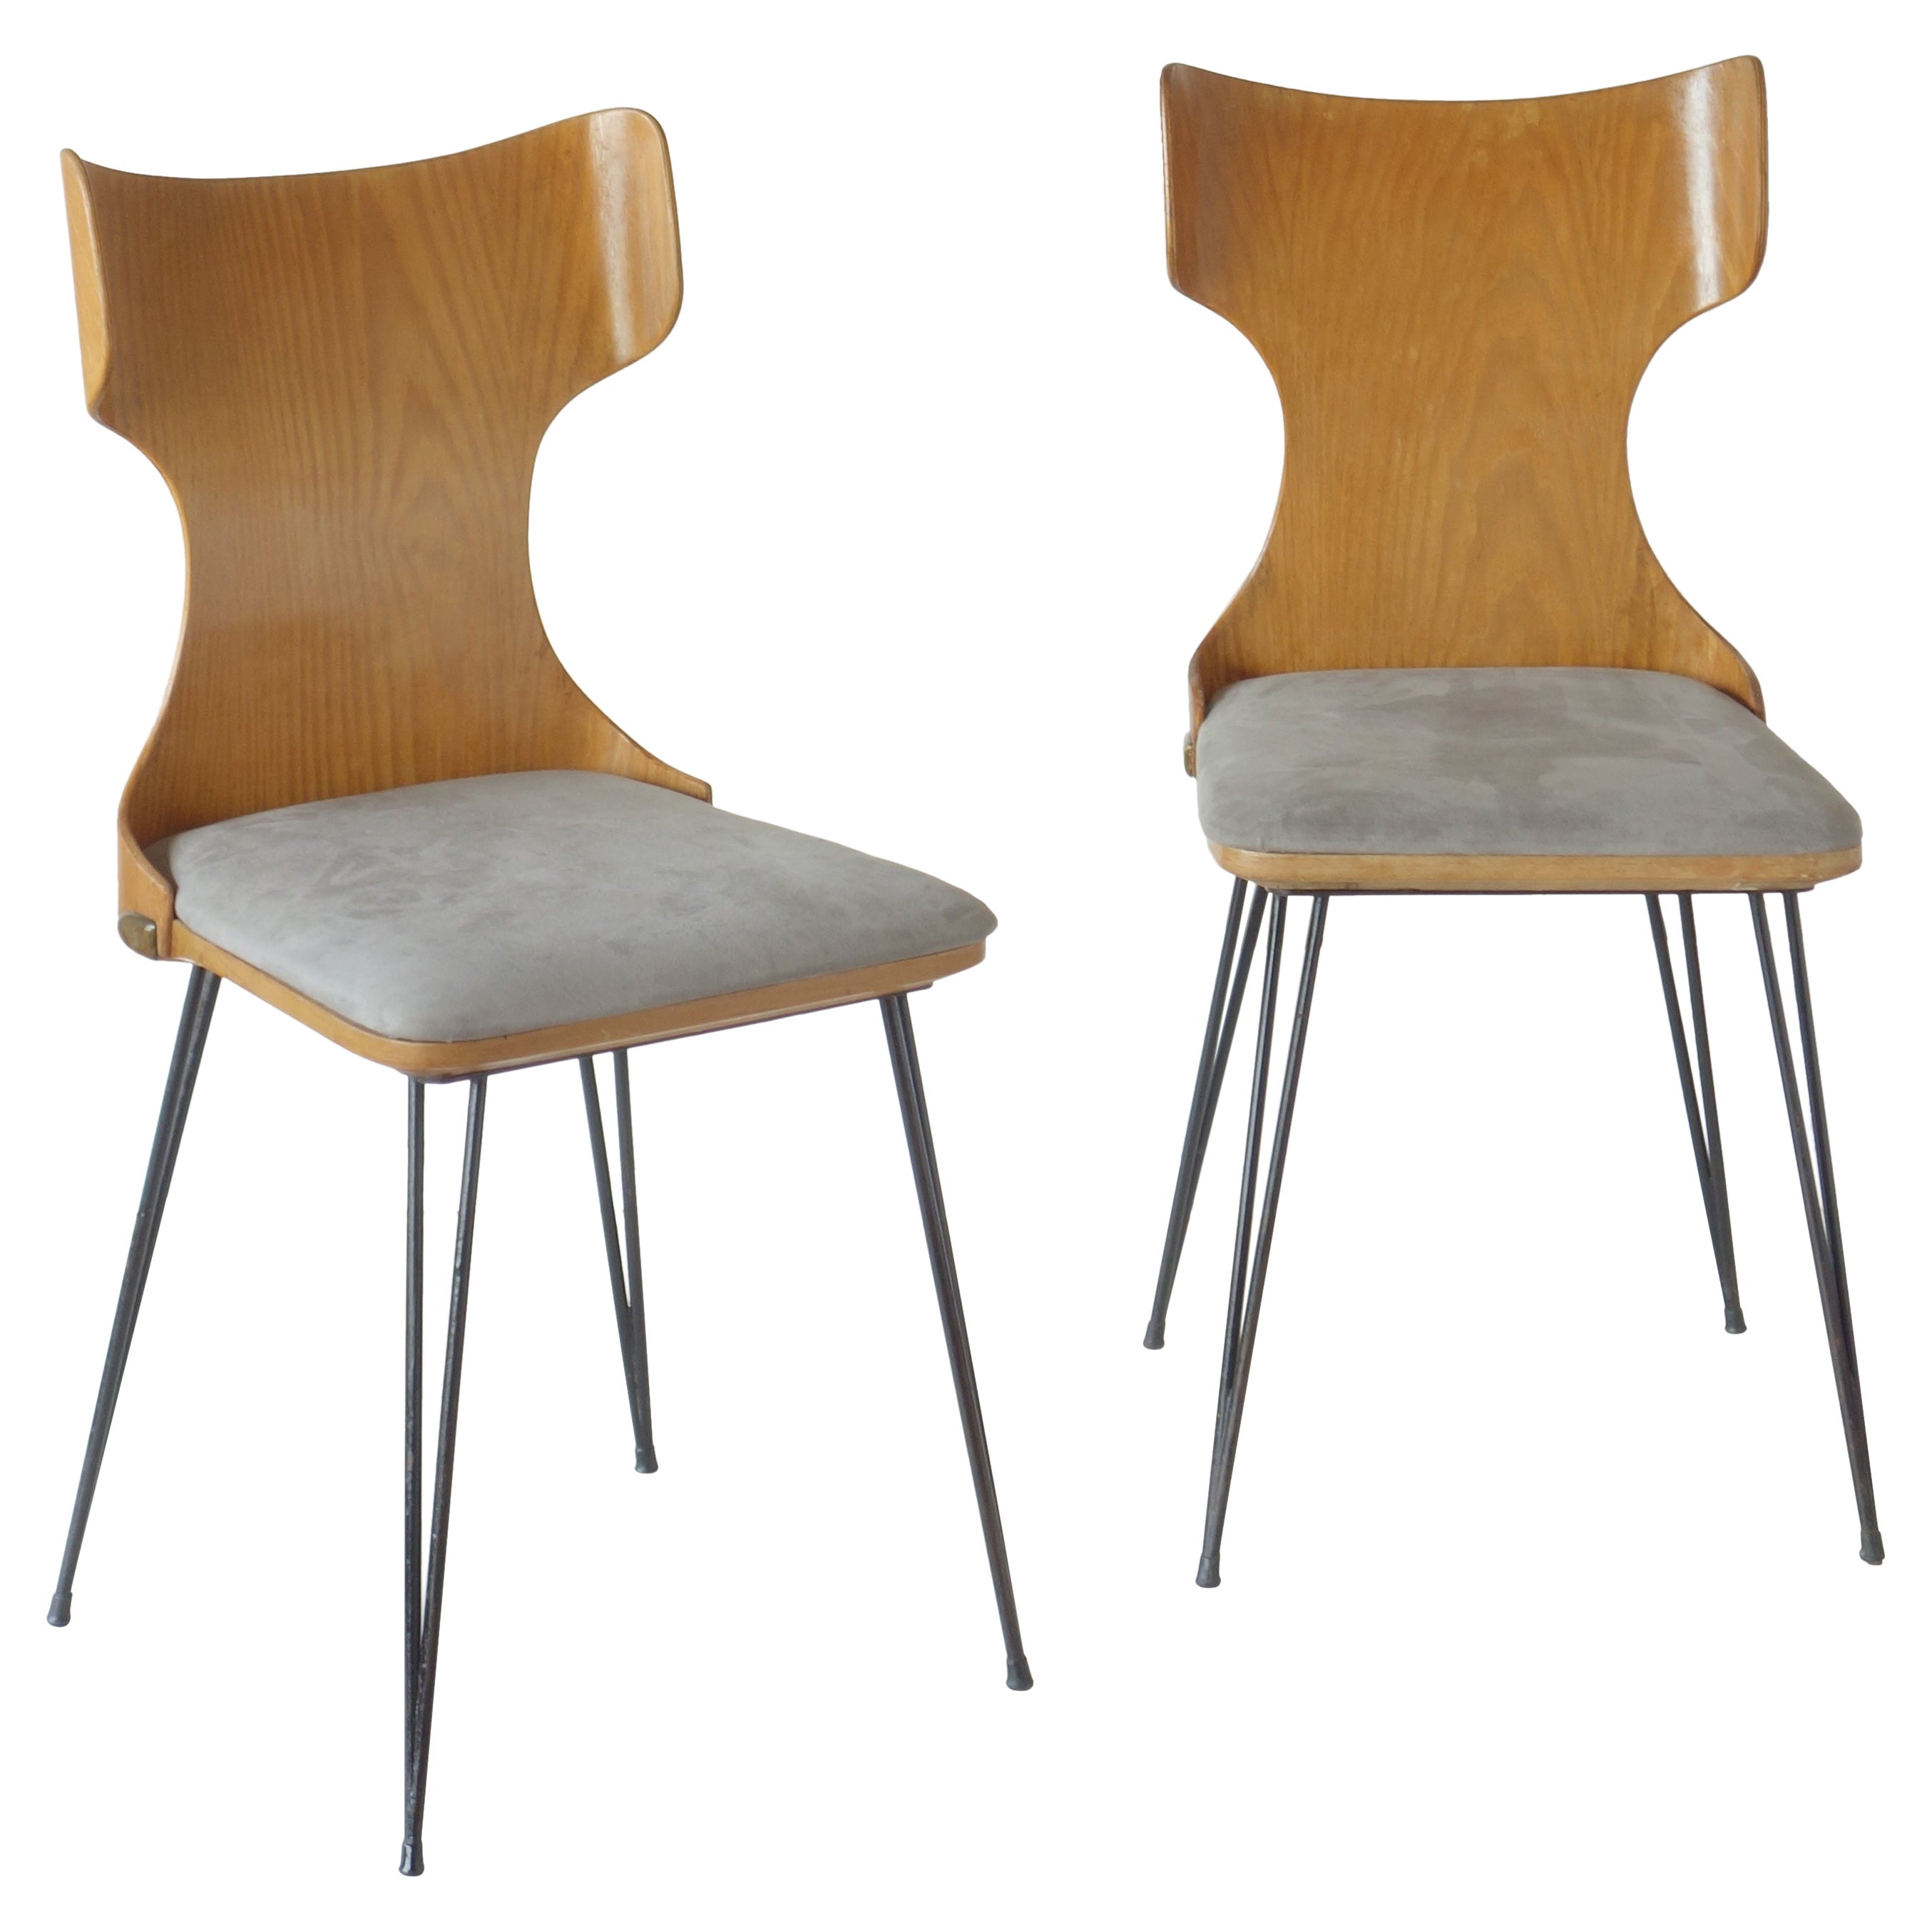 1950s Carlo Ratti Italian Midcentury Design Bentwood Chair Set of 2 For Sale